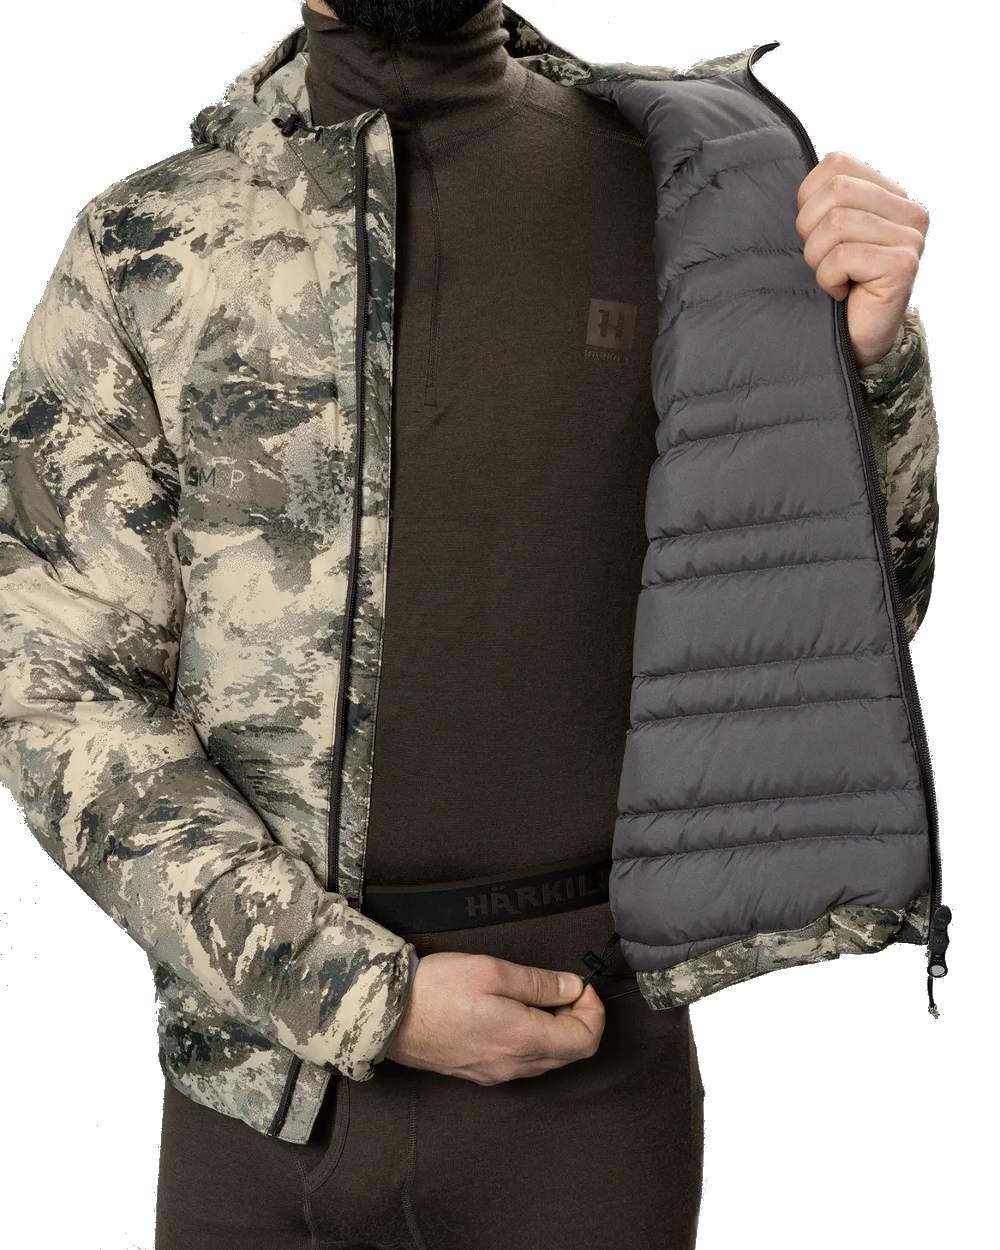 Harkila Mountain Hunter Expedition Packable Down Jacket in AXIS Mountain